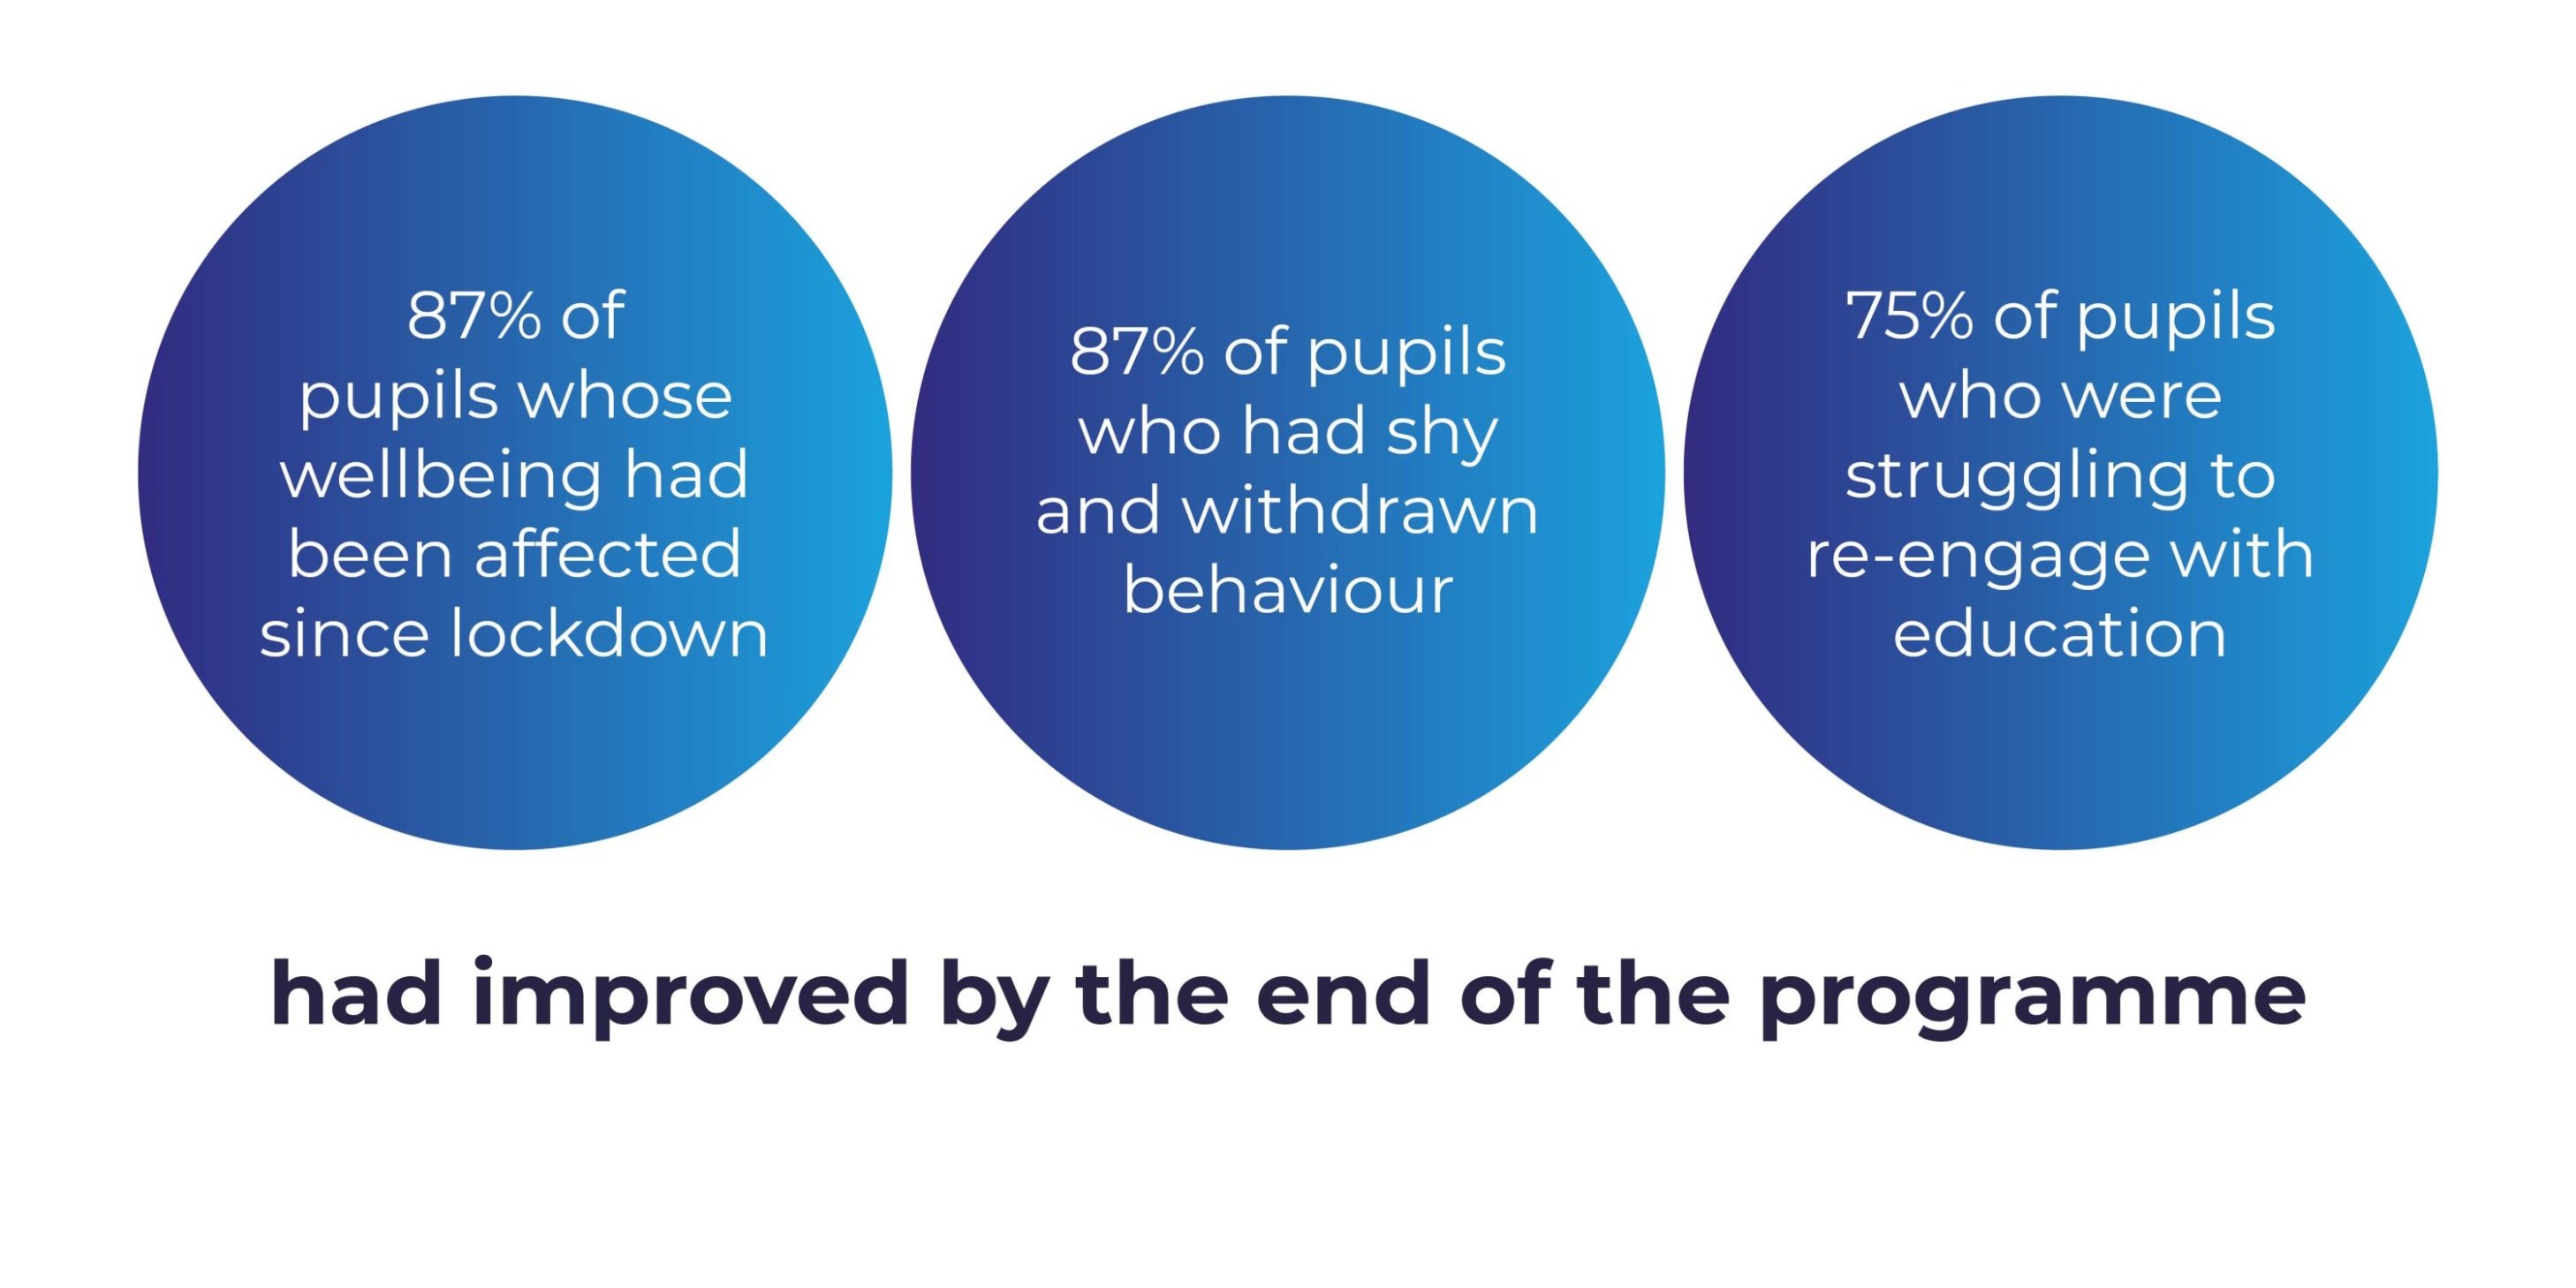 Three blue circles saying 87% of pupils whose wellbeing had been affected since lockdown, 87% of pupils who had shy and withdrawn behaviour, and 75% of pupils who were struggling to re-engage with education had improved by the end of the programme.